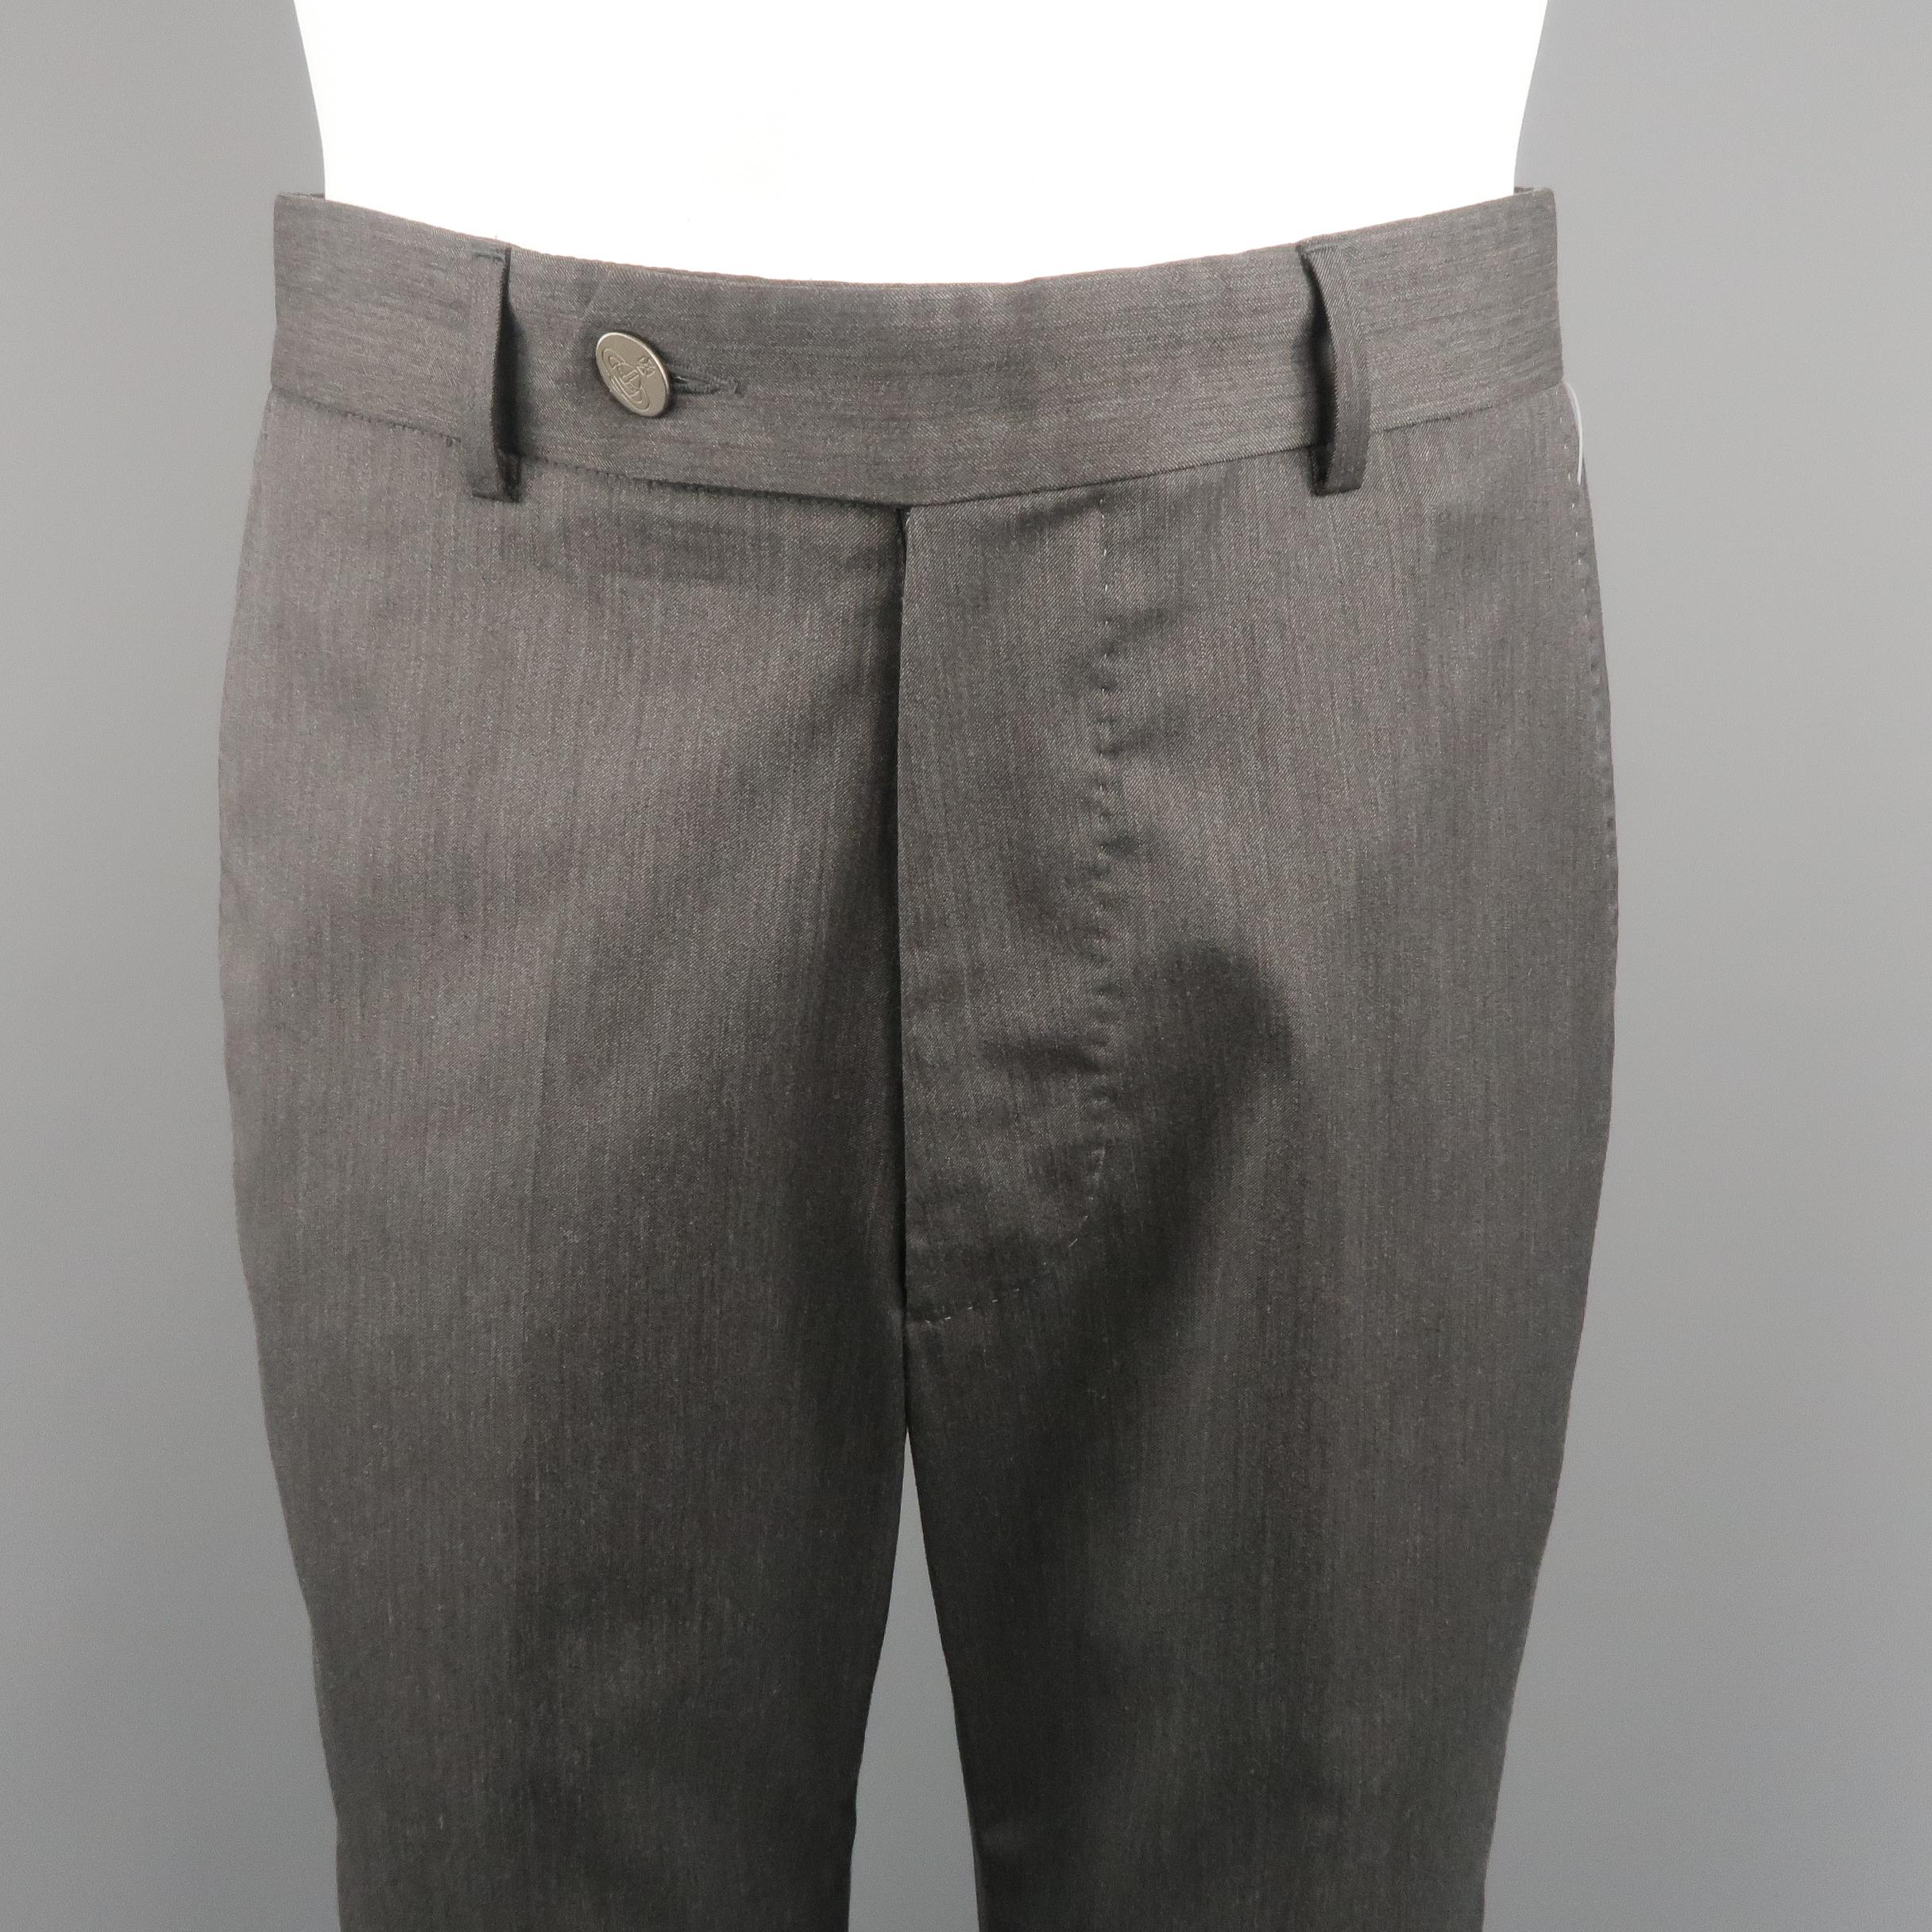 VIVIENNE WESTWOOD dress pants come in solid wool / nylon material, in charcoal tone, with front tab, slant side pocket and flat front. Small signals of use on the back of the right leg. Made in Italy.
 
Excellent Pre-Owned Condition.
Marked: 48 IT
